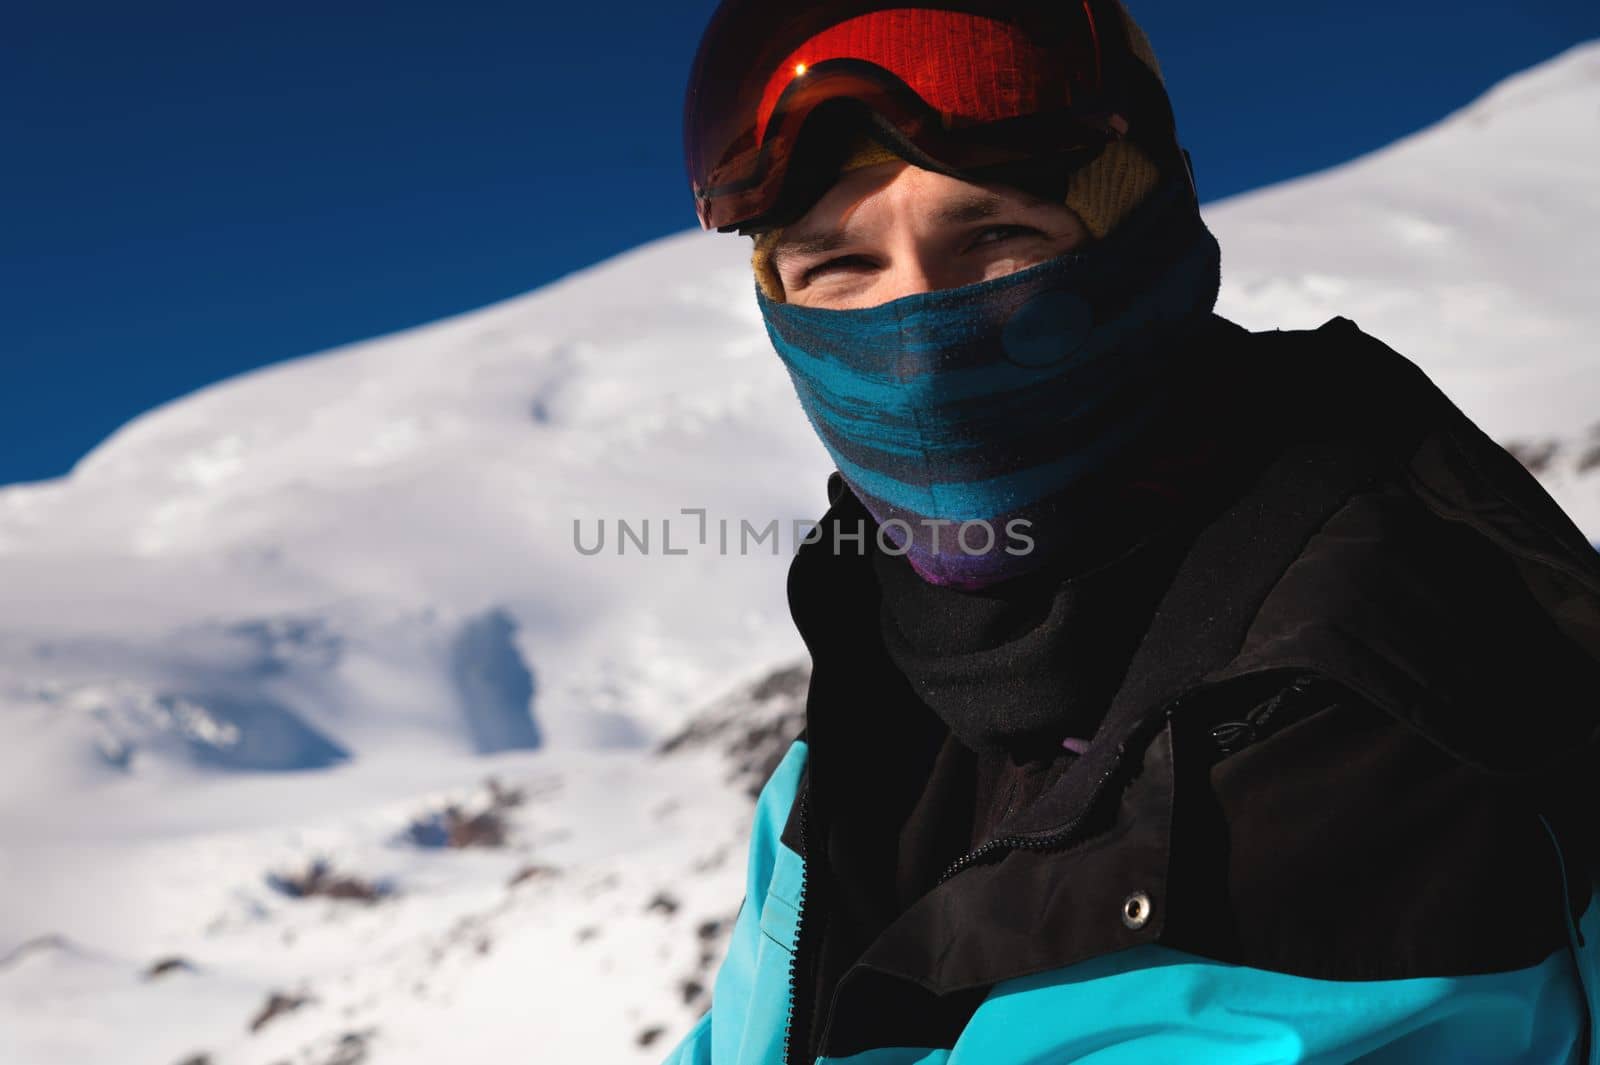 The skier looks at the camera before starting to ski. Man enjoys vacation in winter season. Portrait of a man in a balaclava and ski goggles against the backdrop of a snowy mountain by yanik88